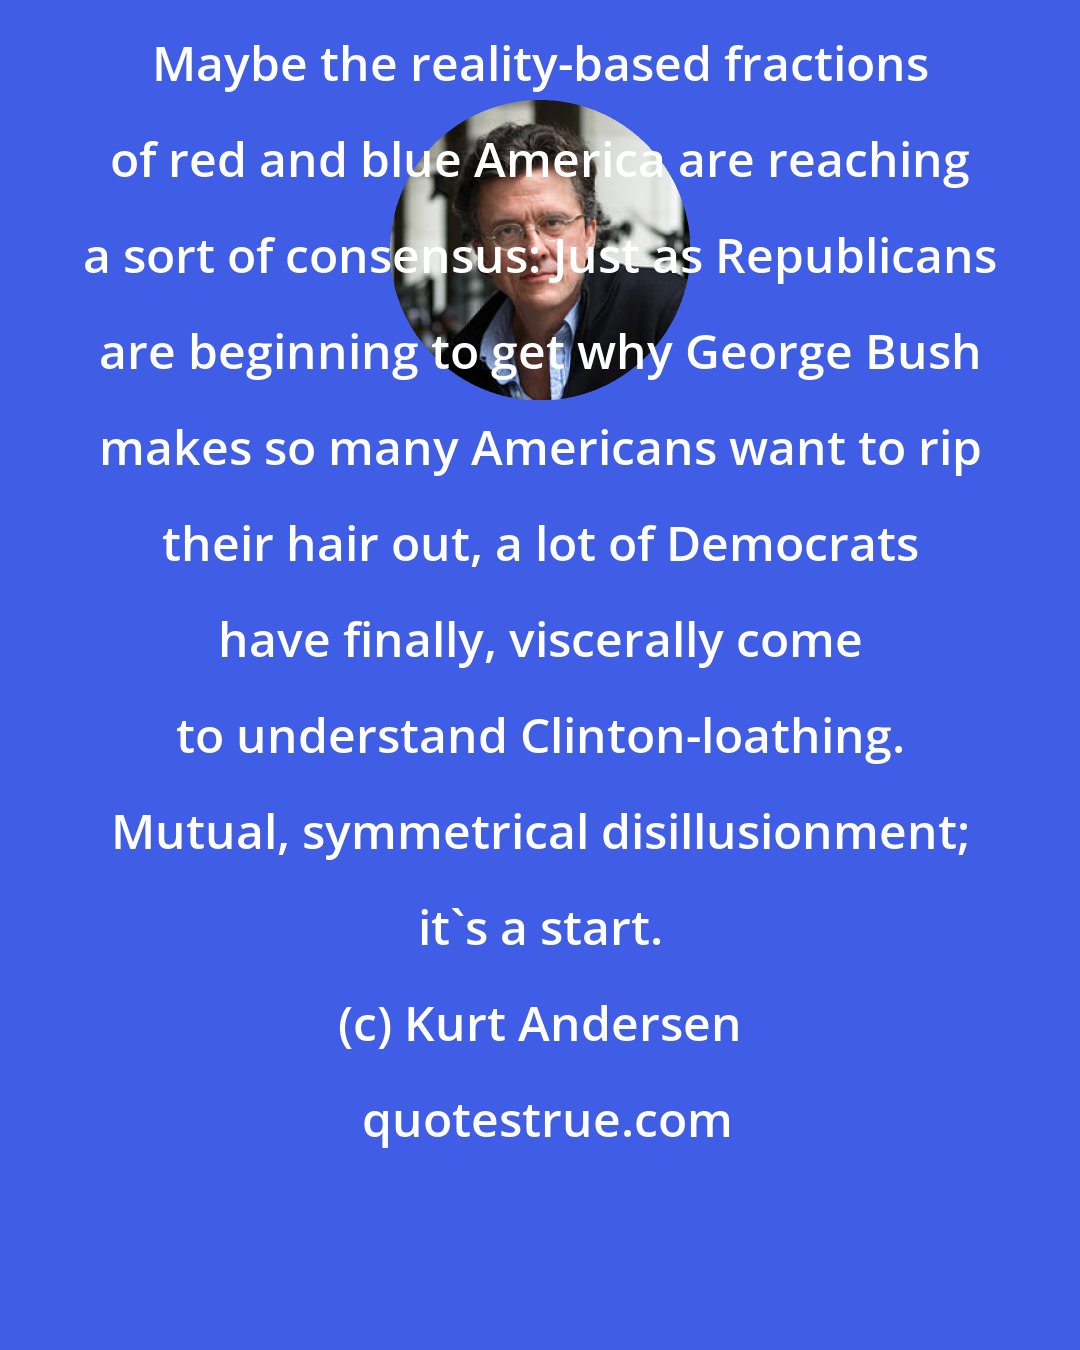 Kurt Andersen: Maybe the reality-based fractions of red and blue America are reaching a sort of consensus: Just as Republicans are beginning to get why George Bush makes so many Americans want to rip their hair out, a lot of Democrats have finally, viscerally come to understand Clinton-loathing. Mutual, symmetrical disillusionment; it's a start.